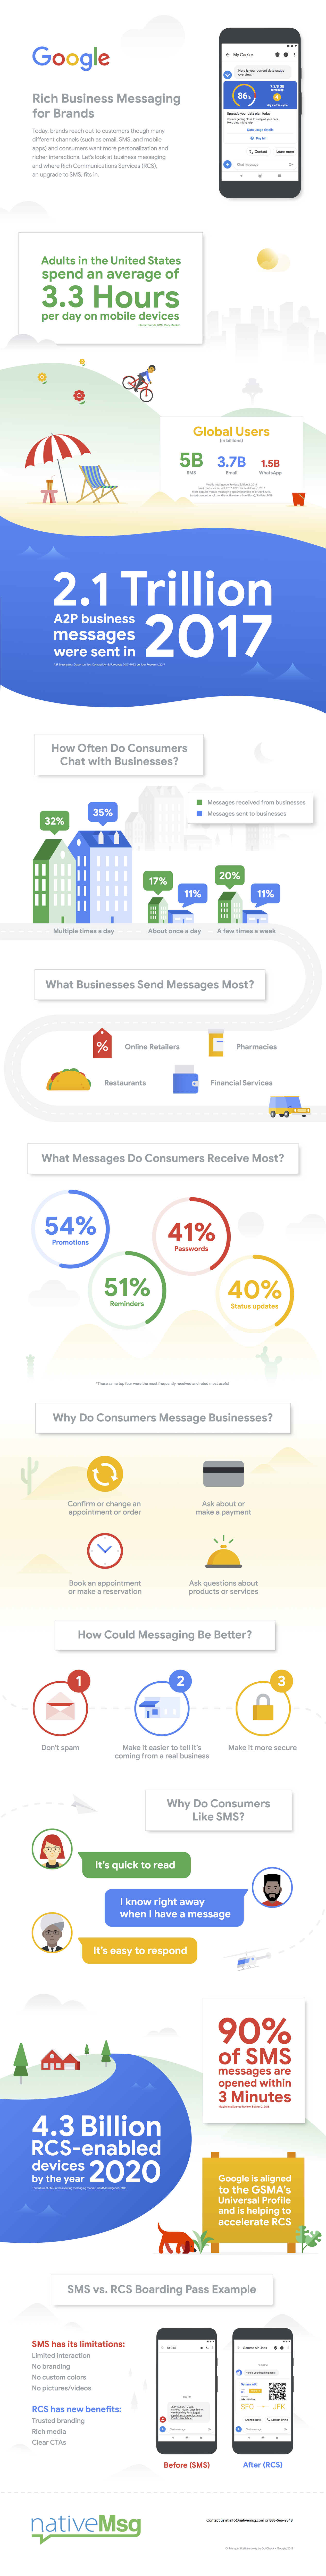 Google infographic RCS Business Messaging and 